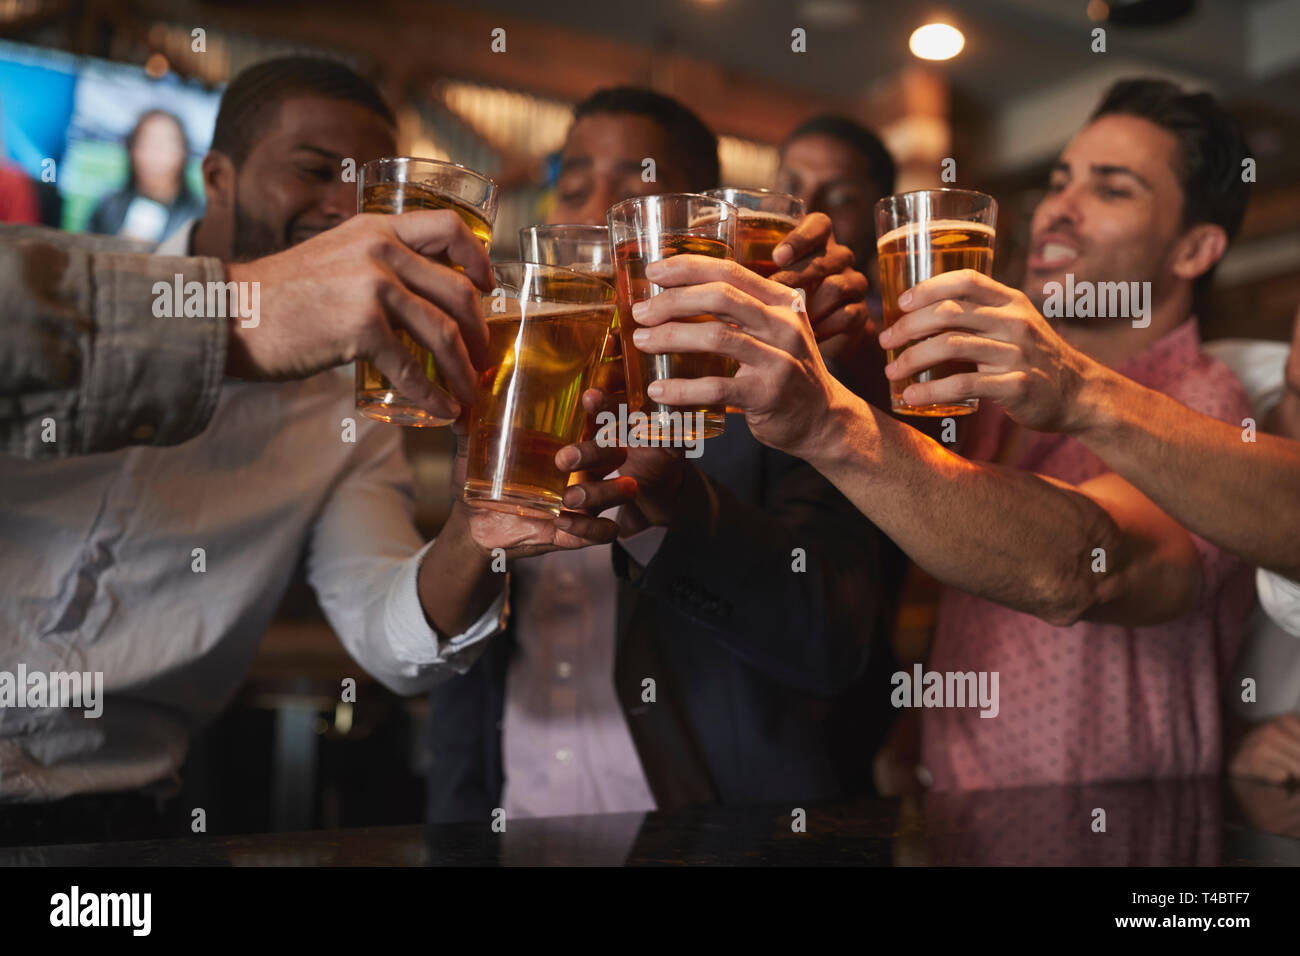 Group Of Male Friends On Night Out For Bachelor Party In Bar Making Toast Together Stock Photo